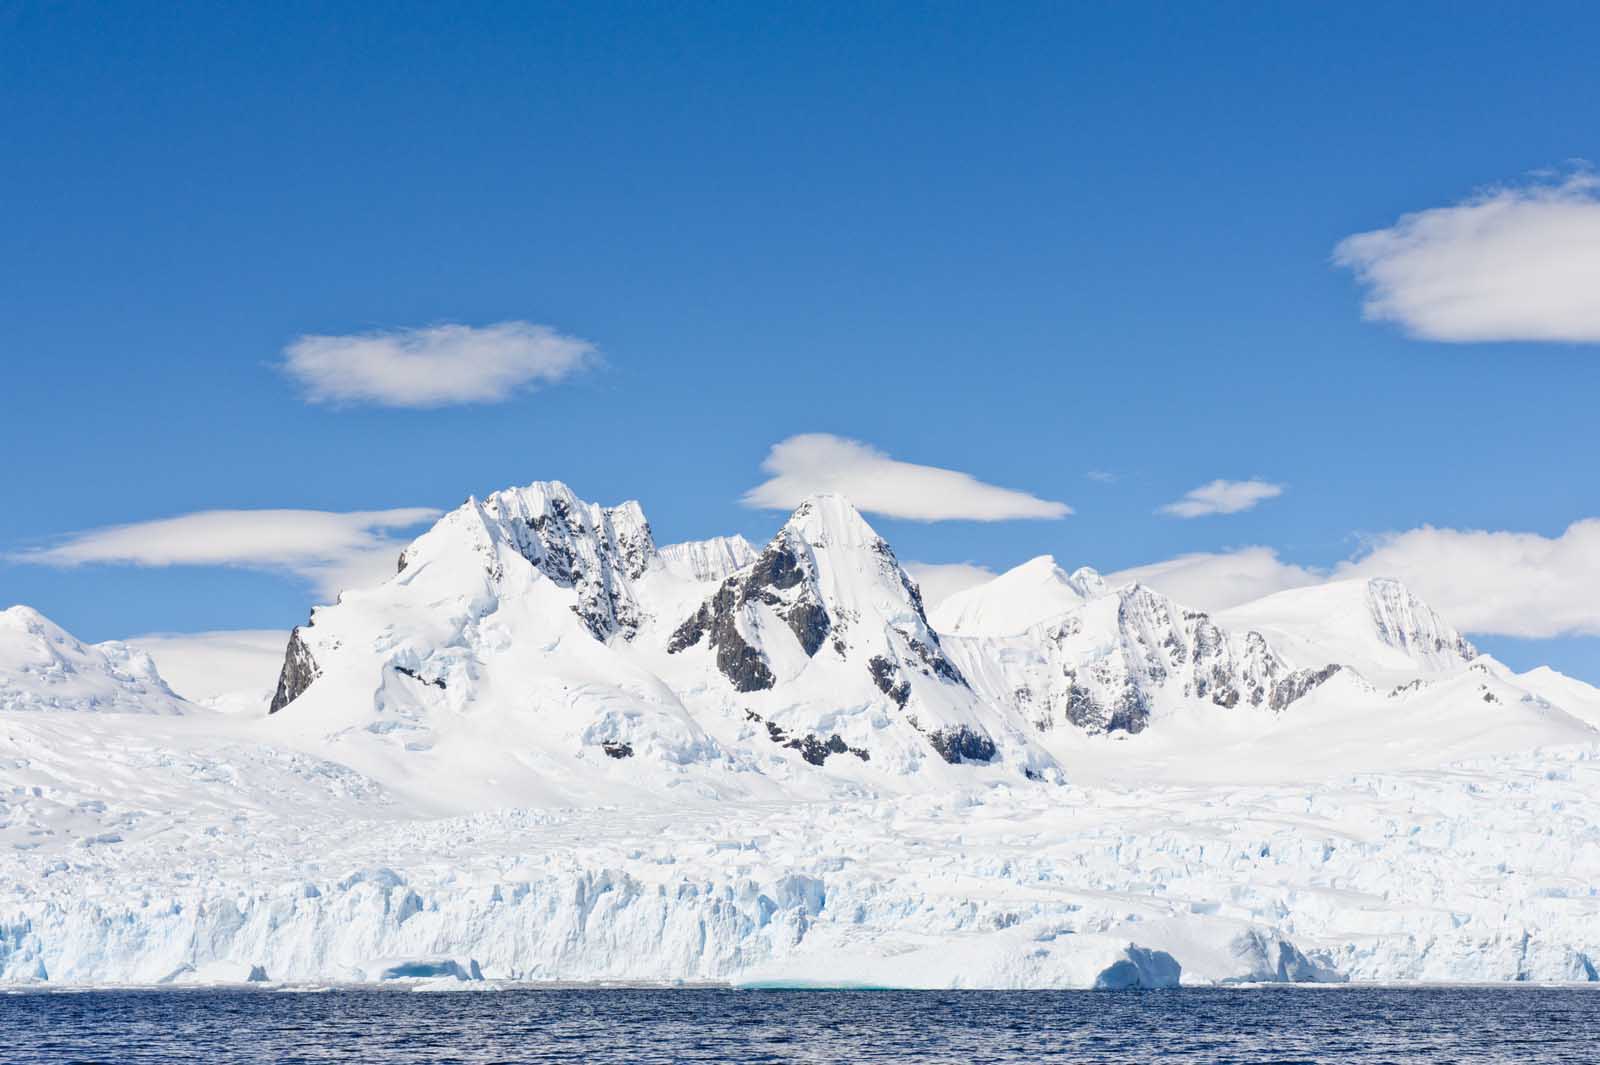 Antarctica - Discovery and learning voyage